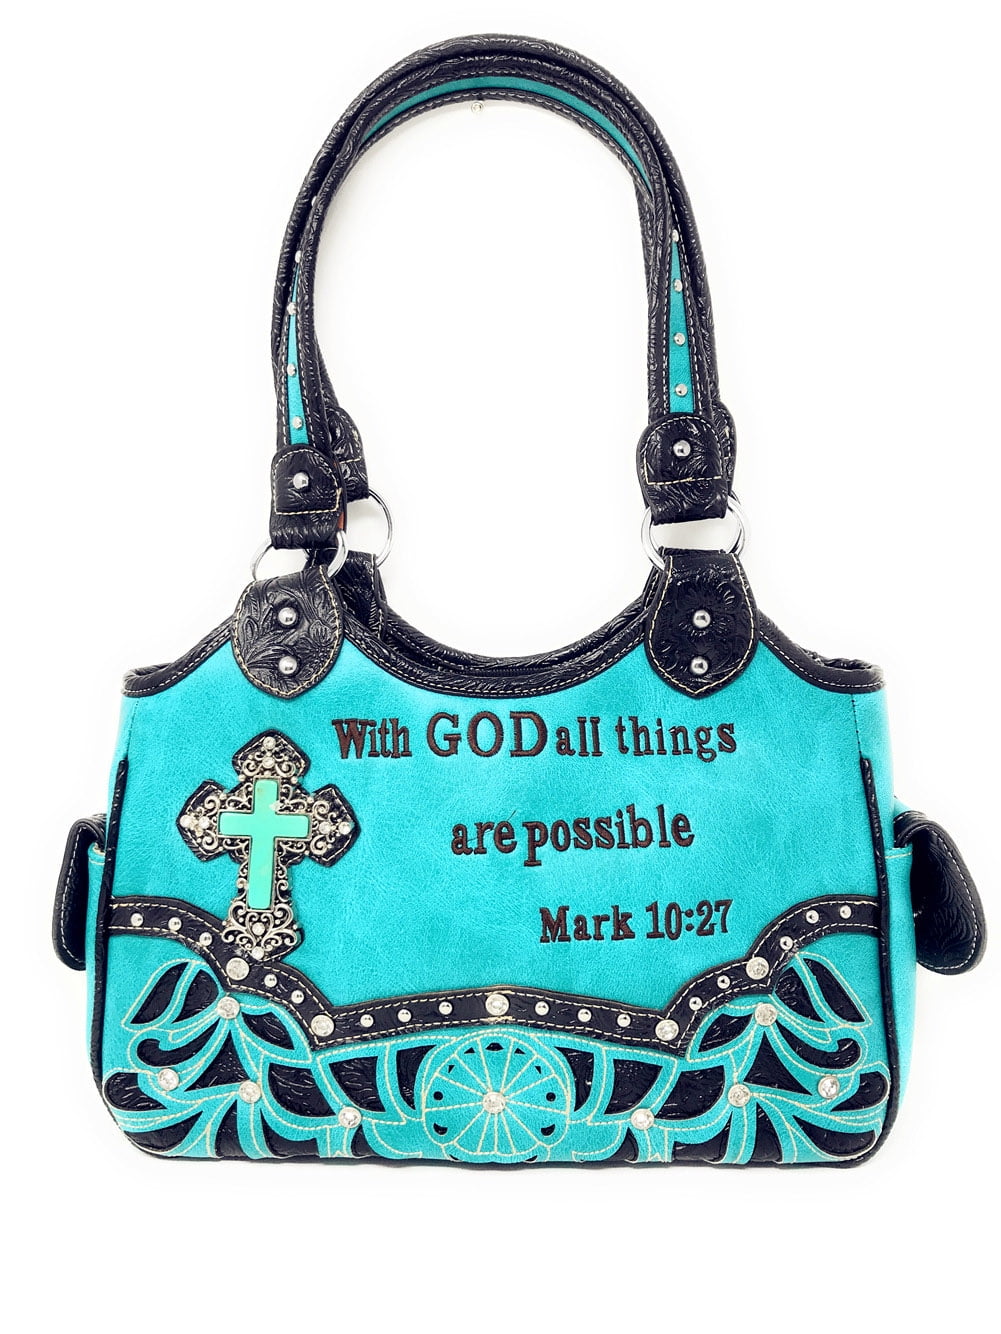 Western Style embroidered Scripture Verse Books Bible Cover Messenger Bag Crossbody 